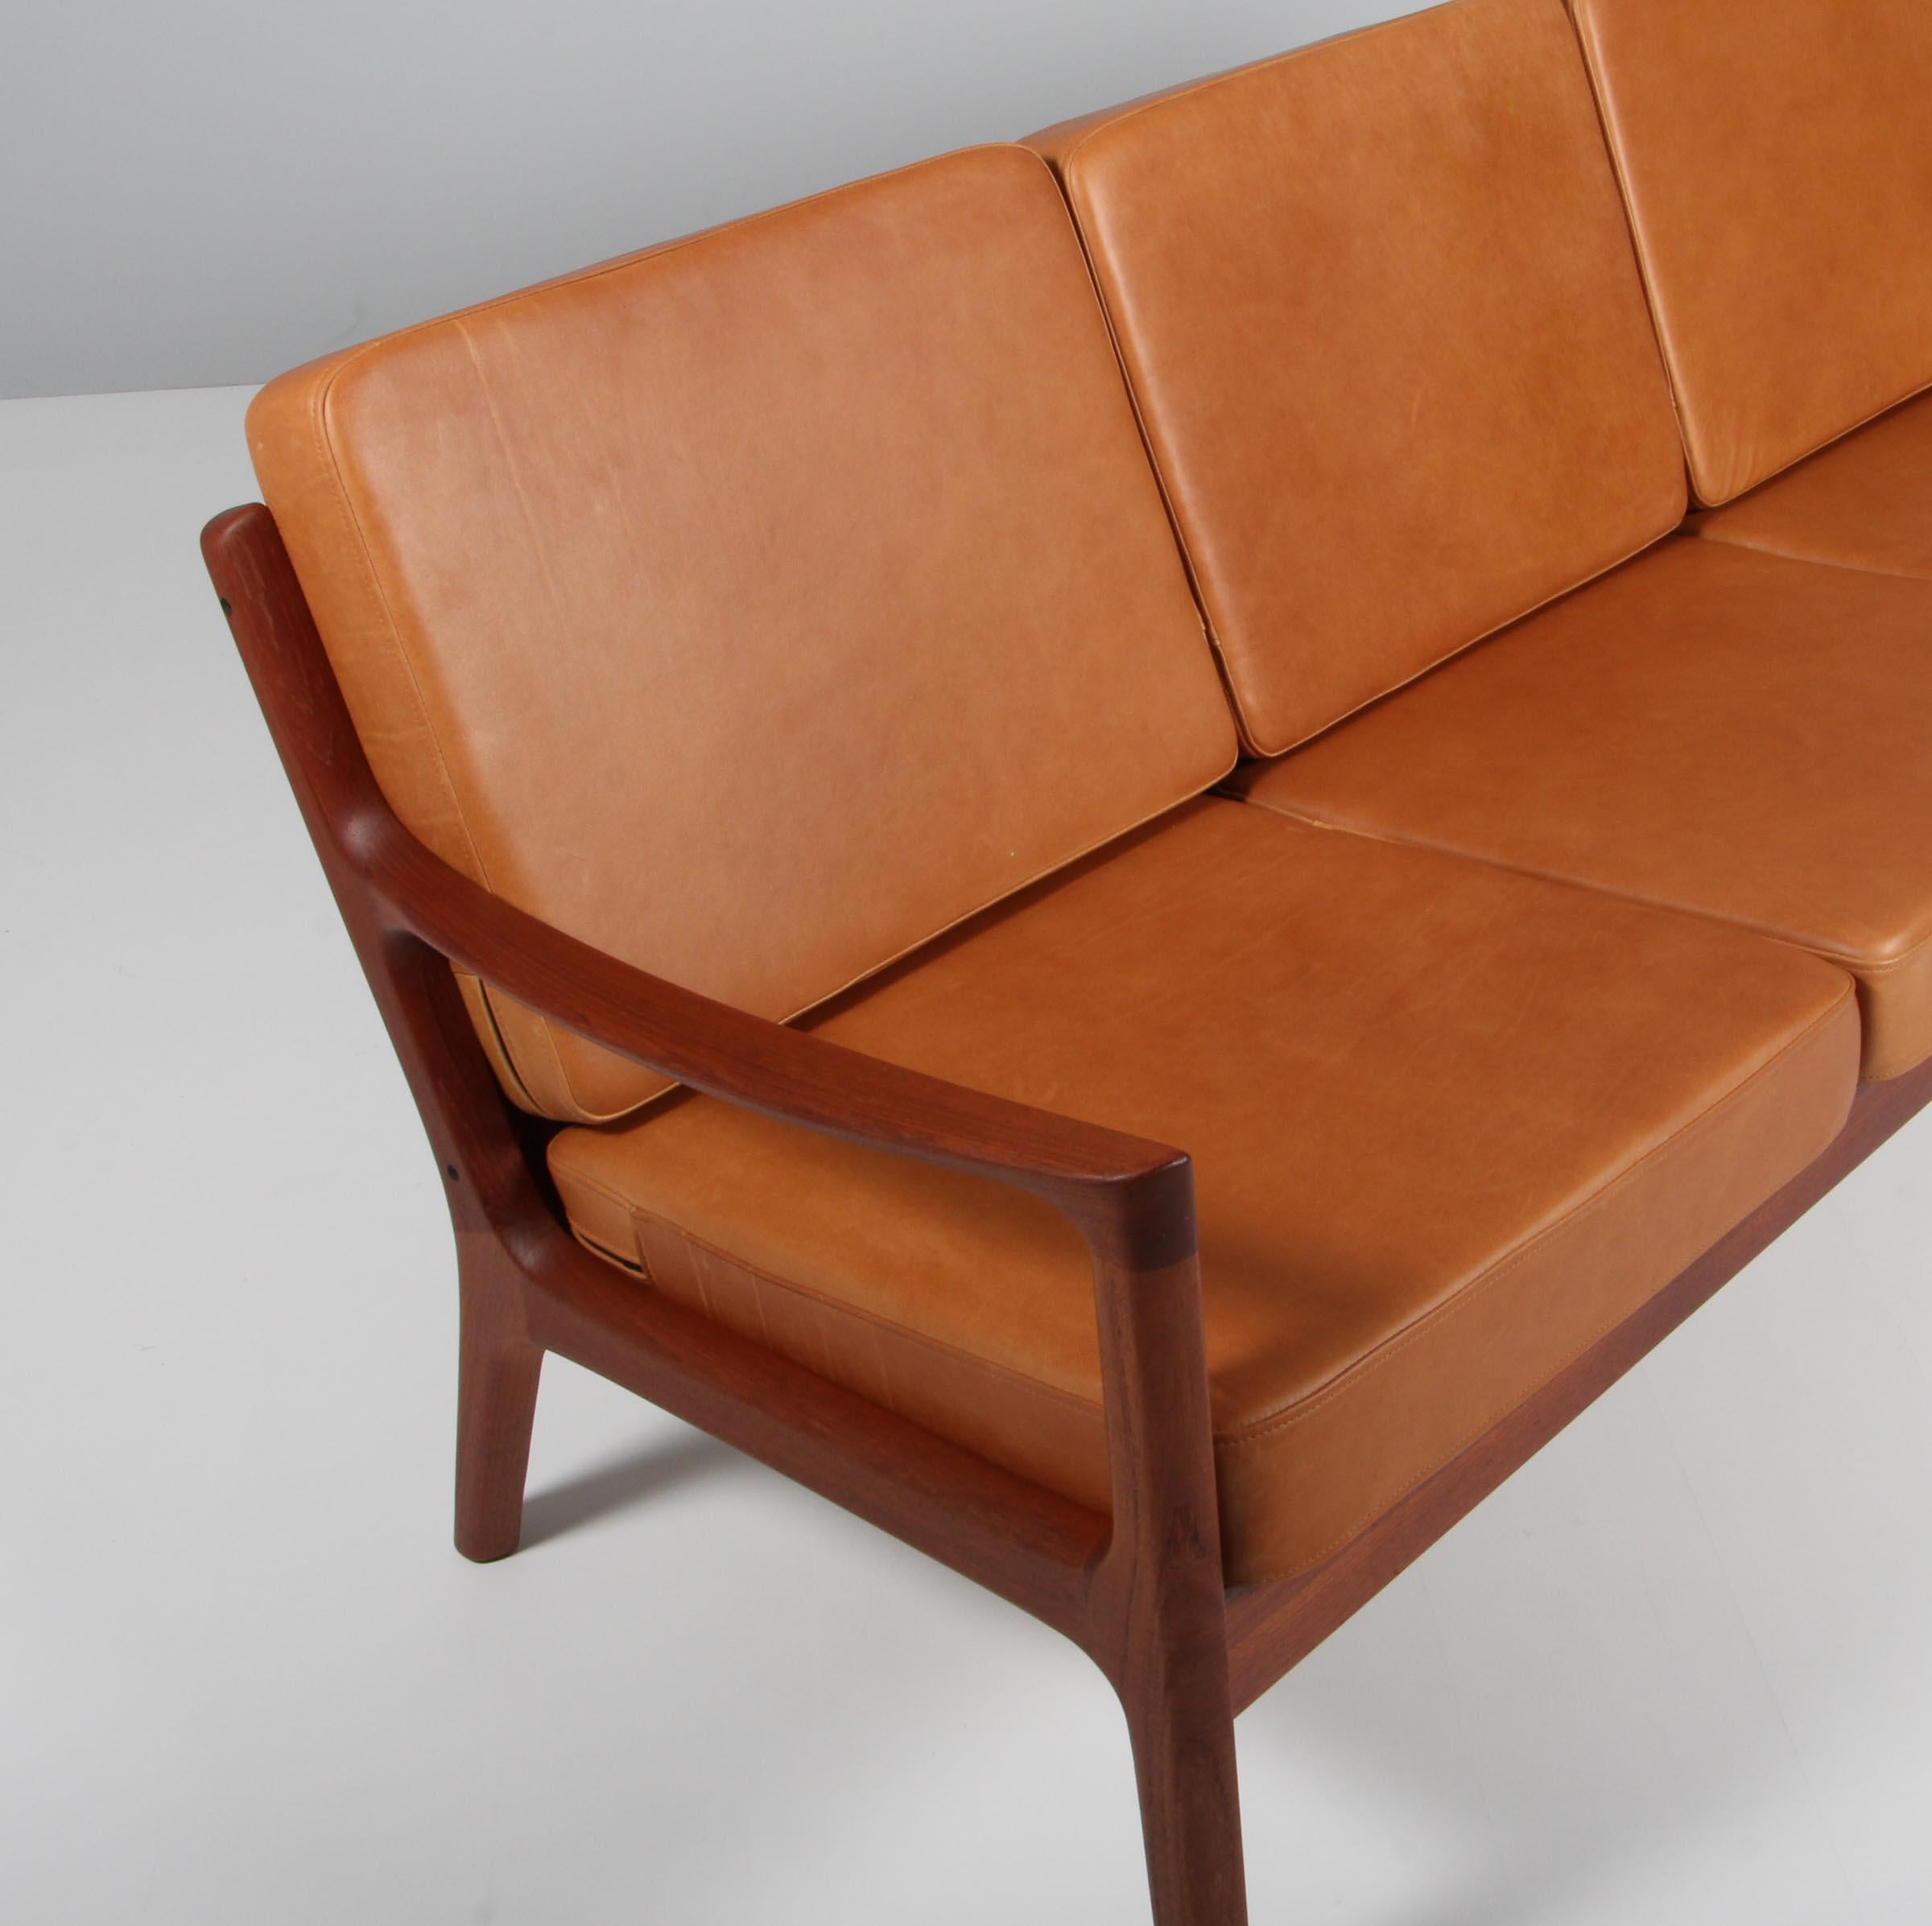 Ole Wanscher three-seat sofa new upholstered with vintage aniline leather.

Made of solid teak.

Model senator, made by Cado.